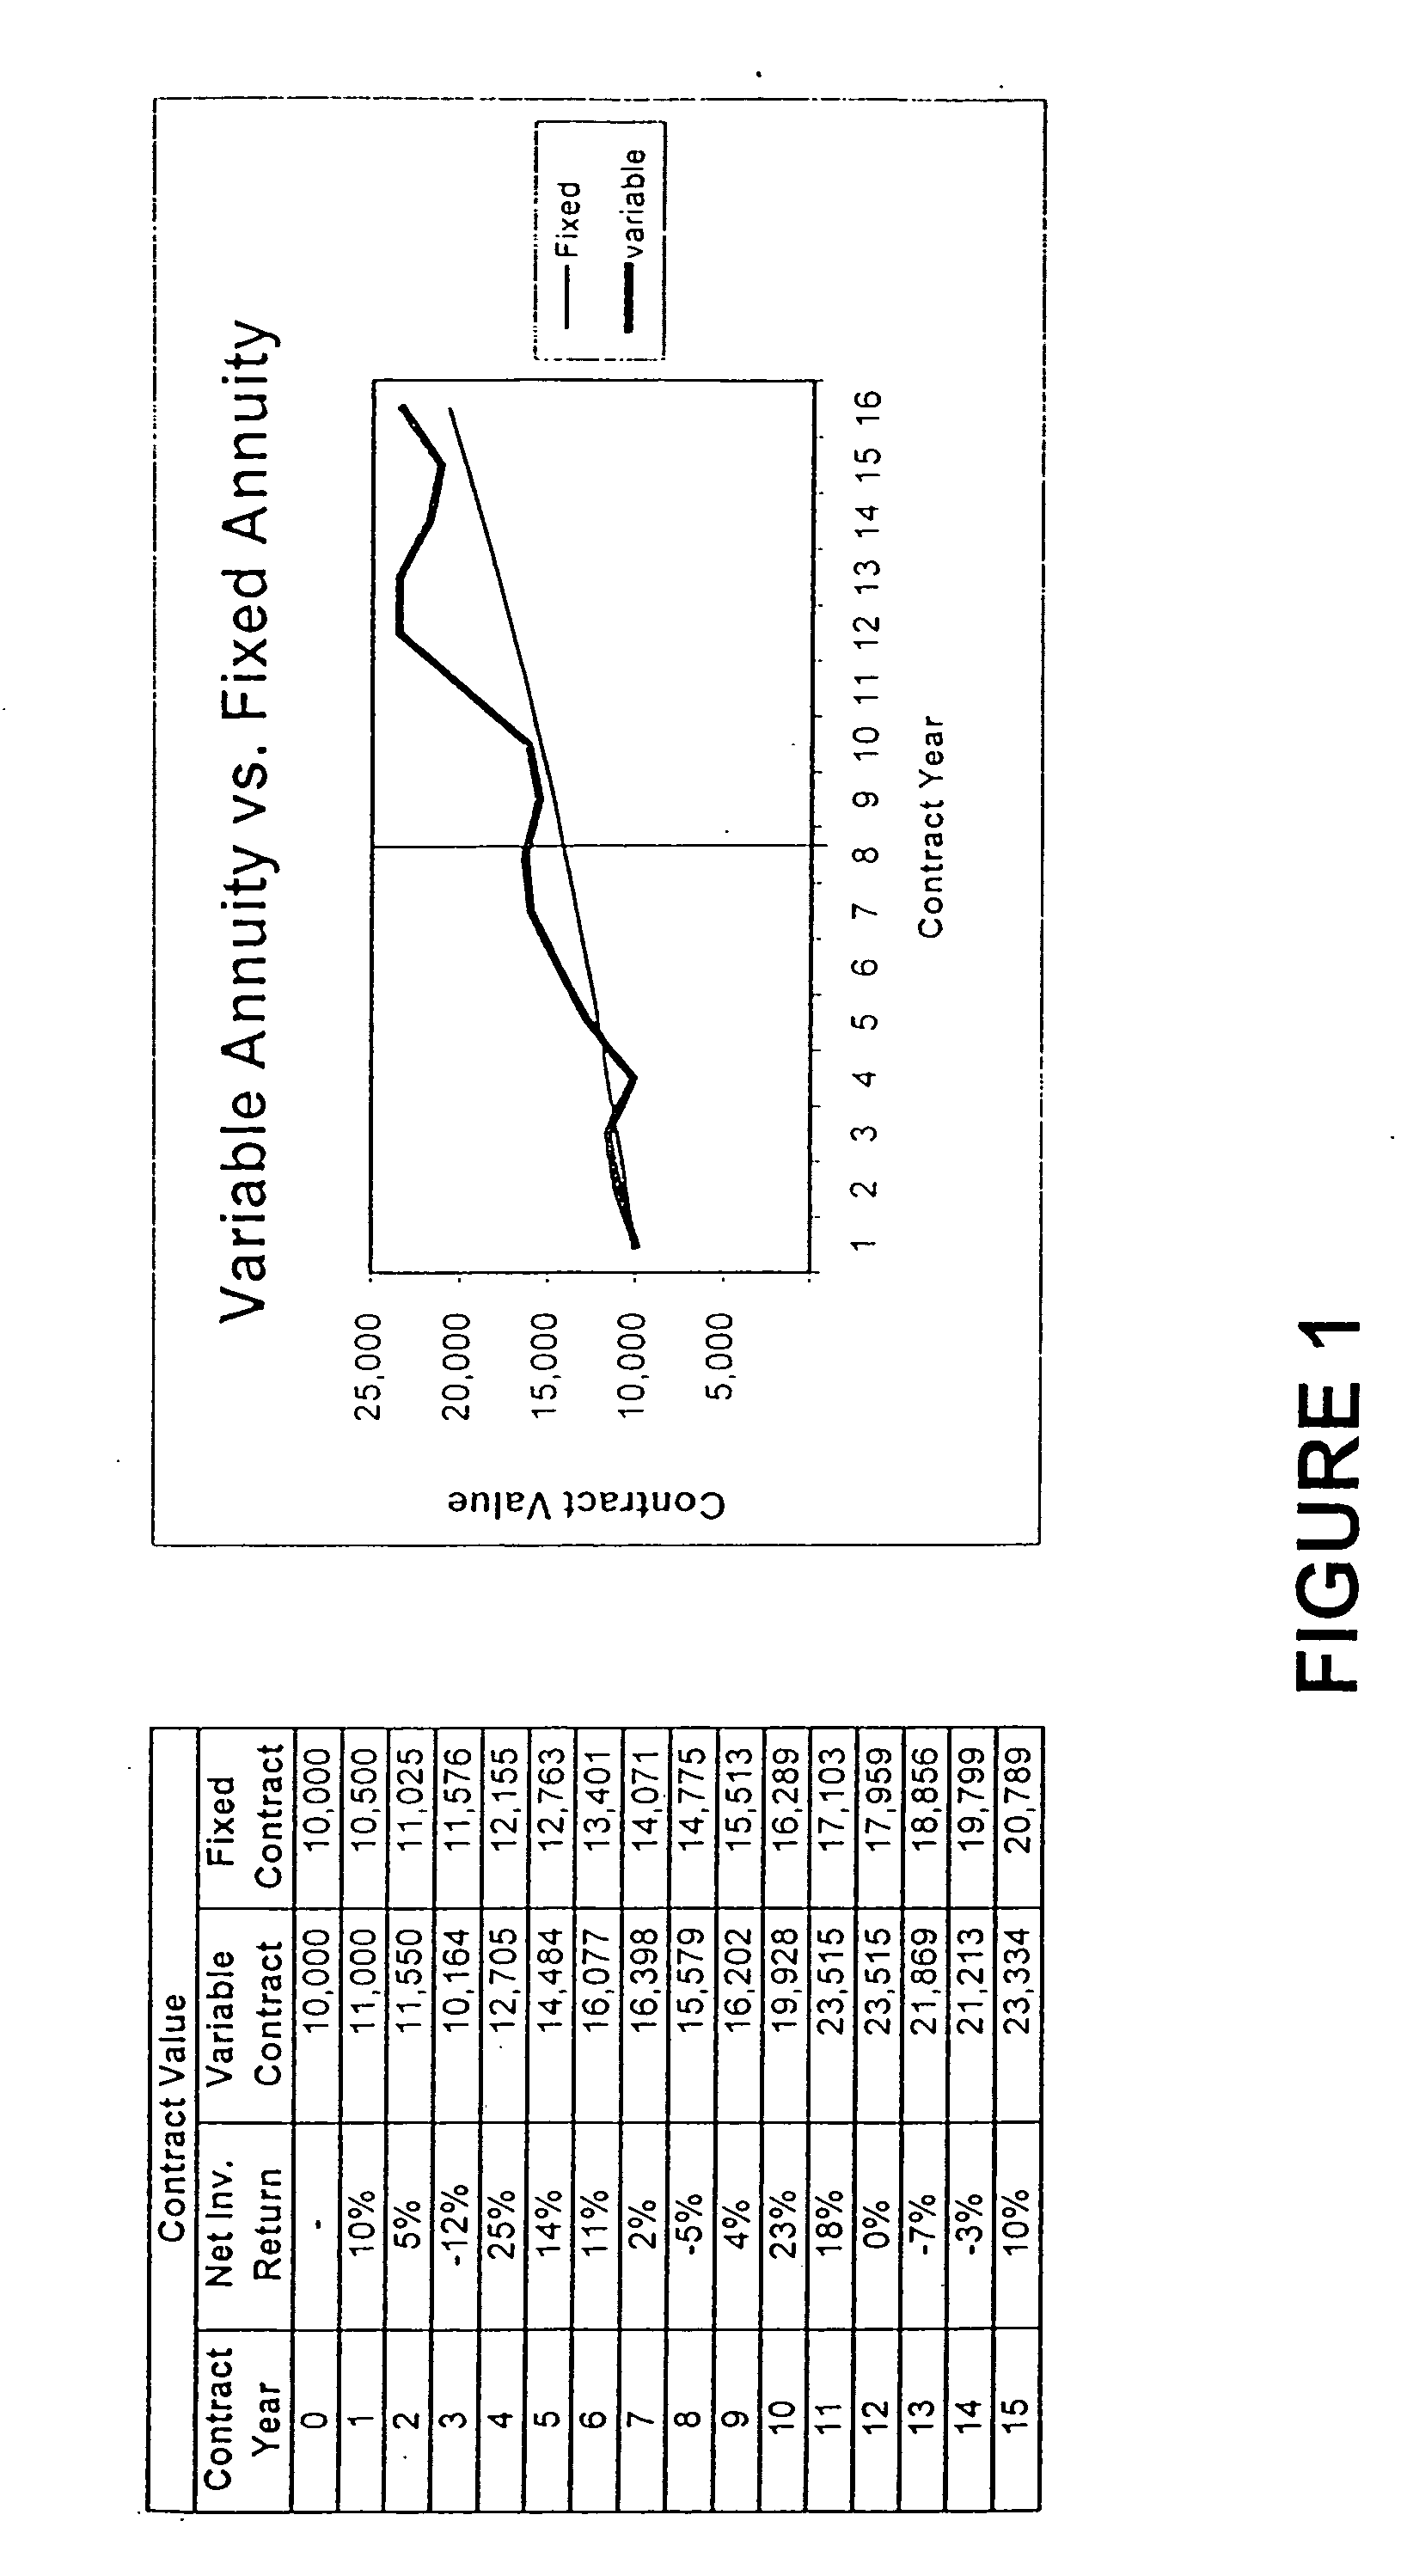 Method and apparatus for providing retirement income benefits